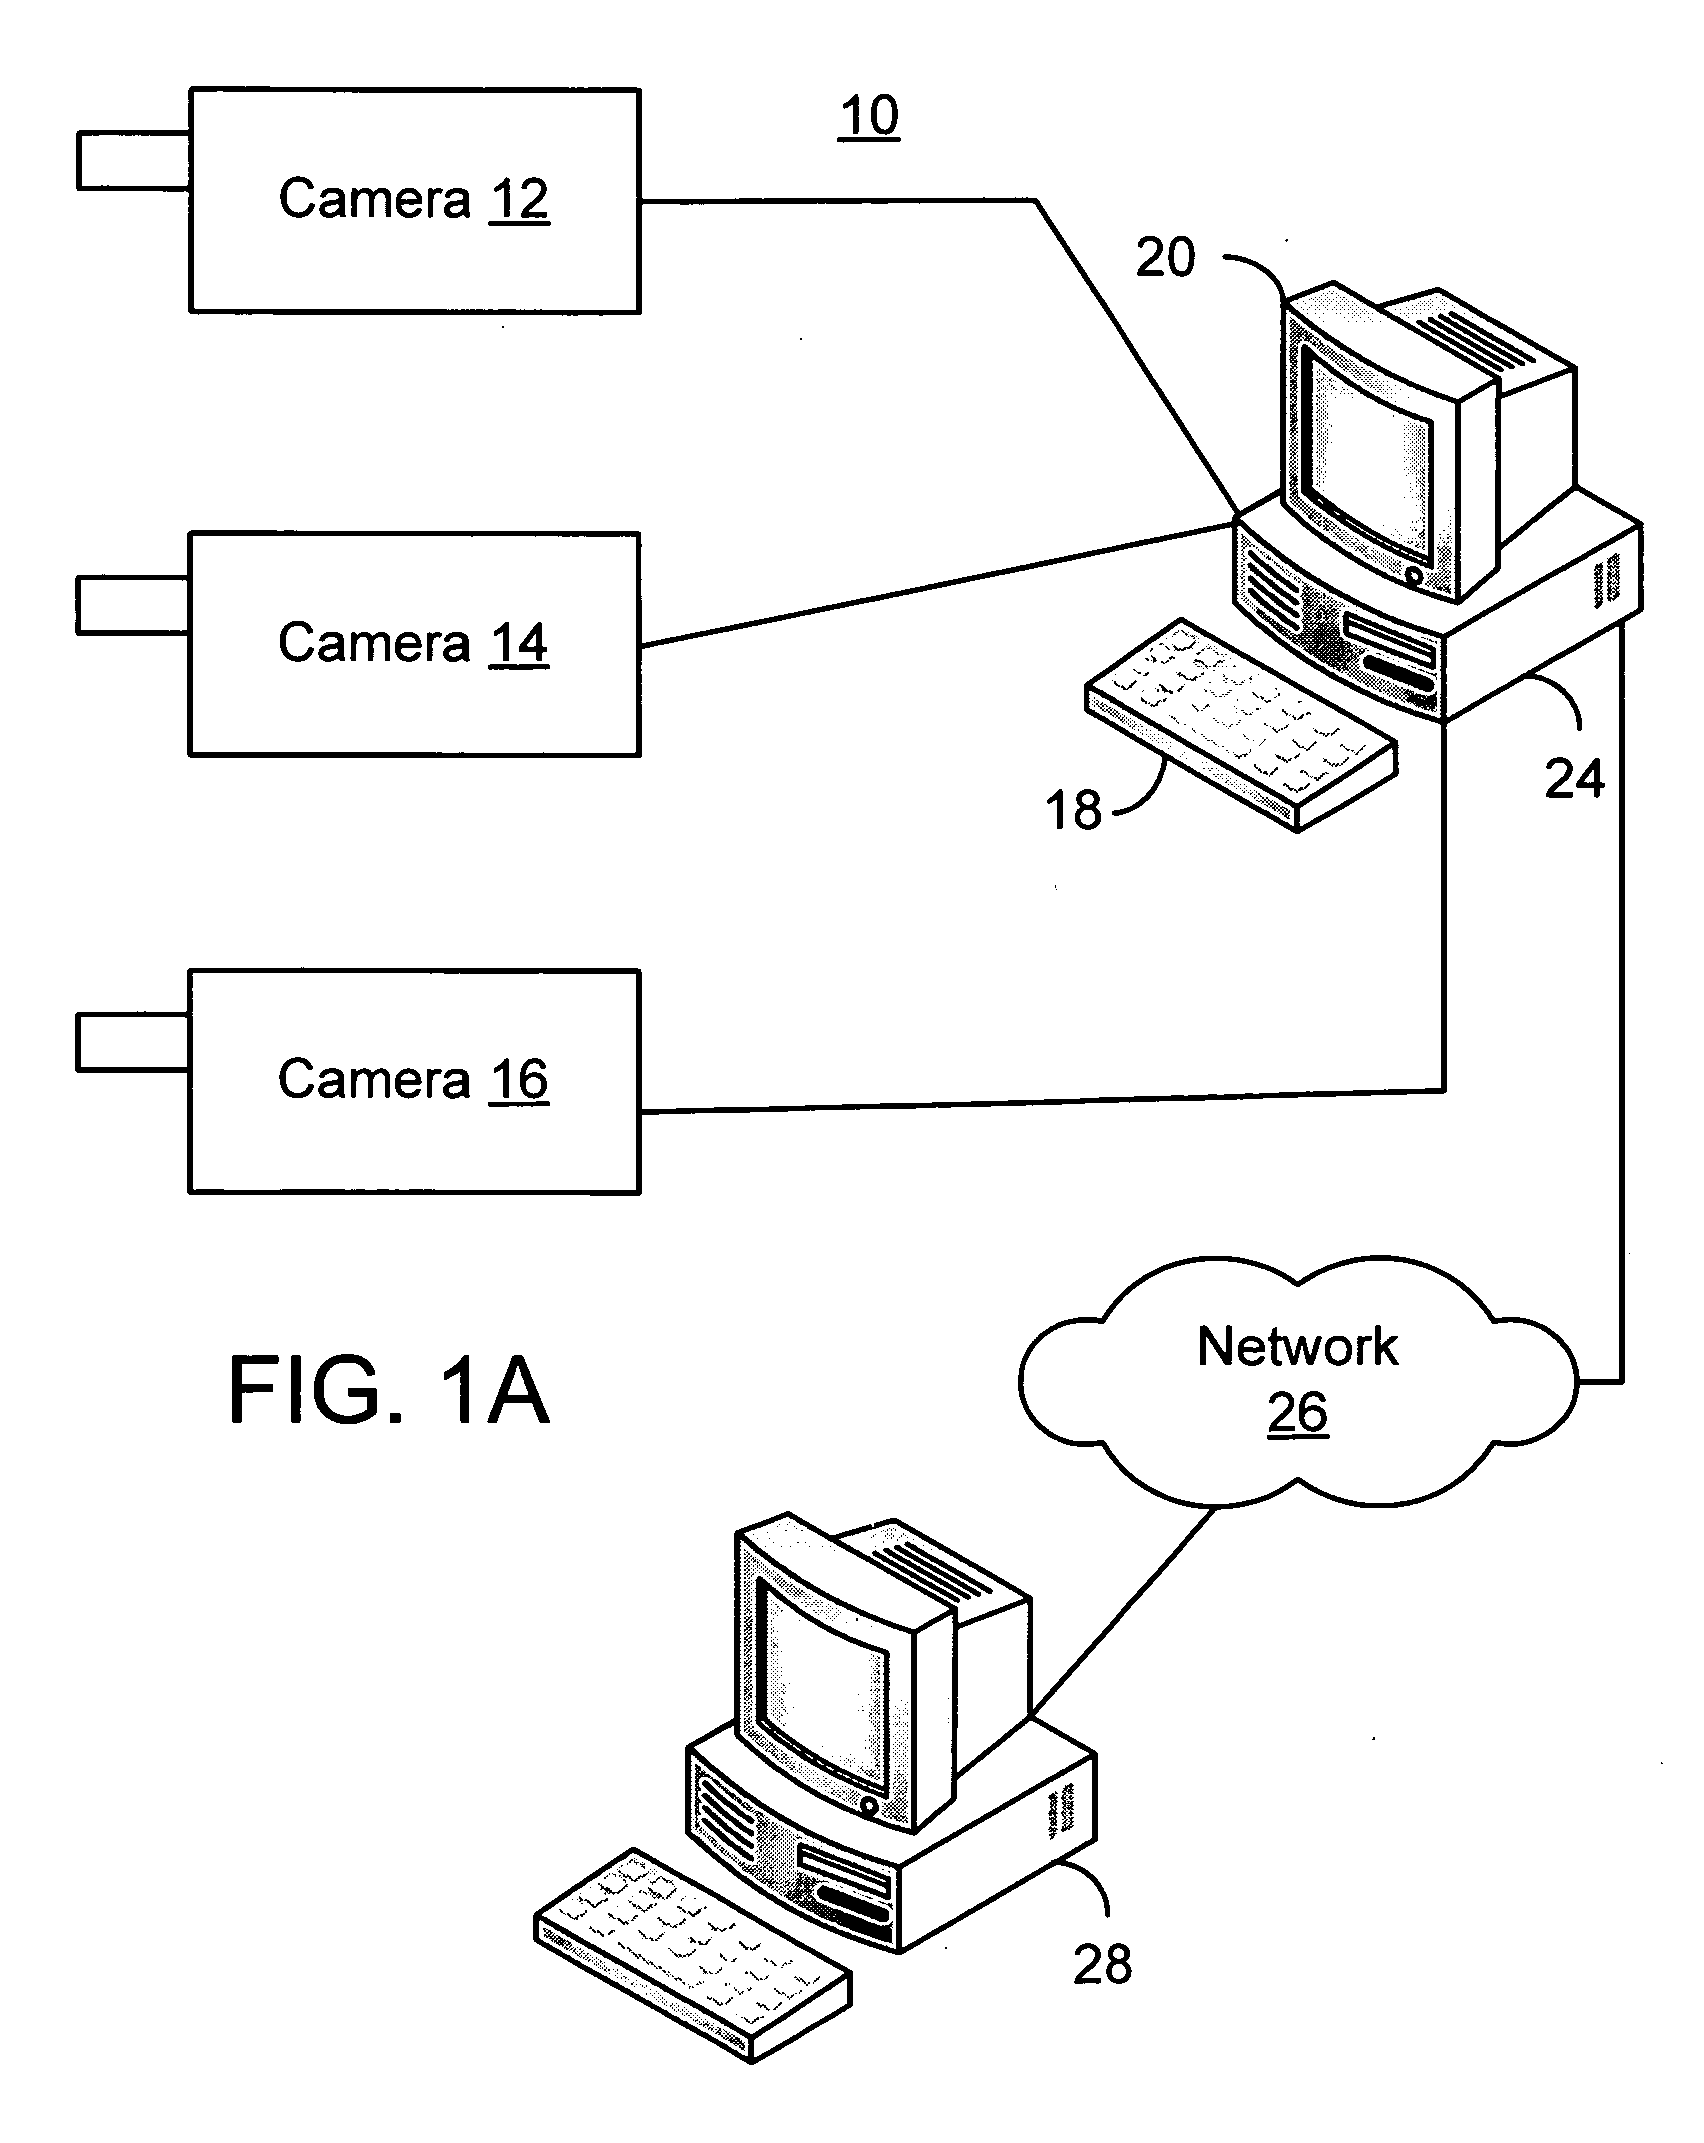 Image and video stitching and viewing method and system